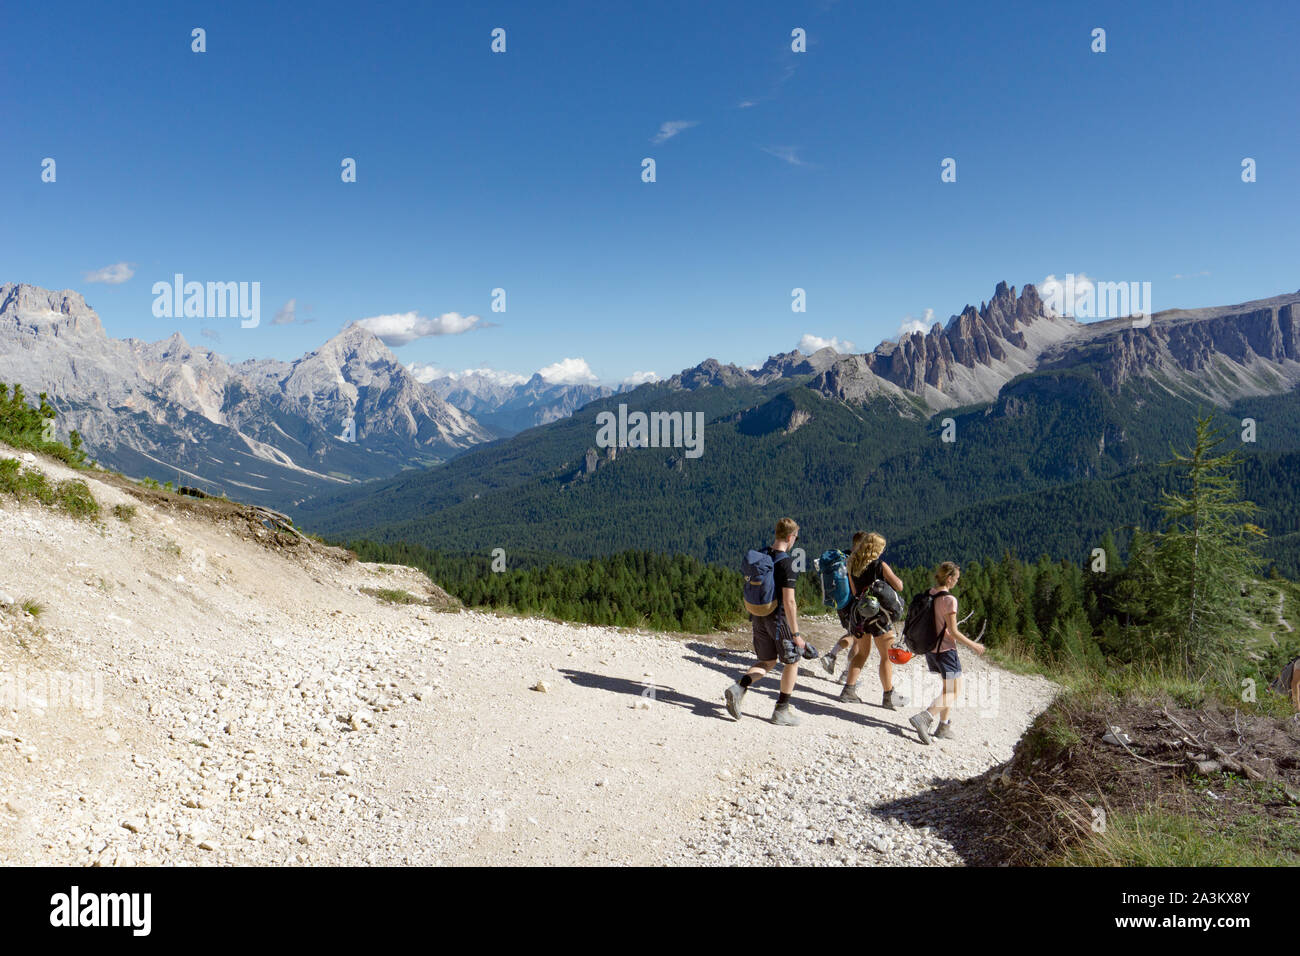 climbers walking down a road in a Dolomite mountain landscape after a hard climb with a great panorama view behind them of the Alta Badia mountains Stock Photo